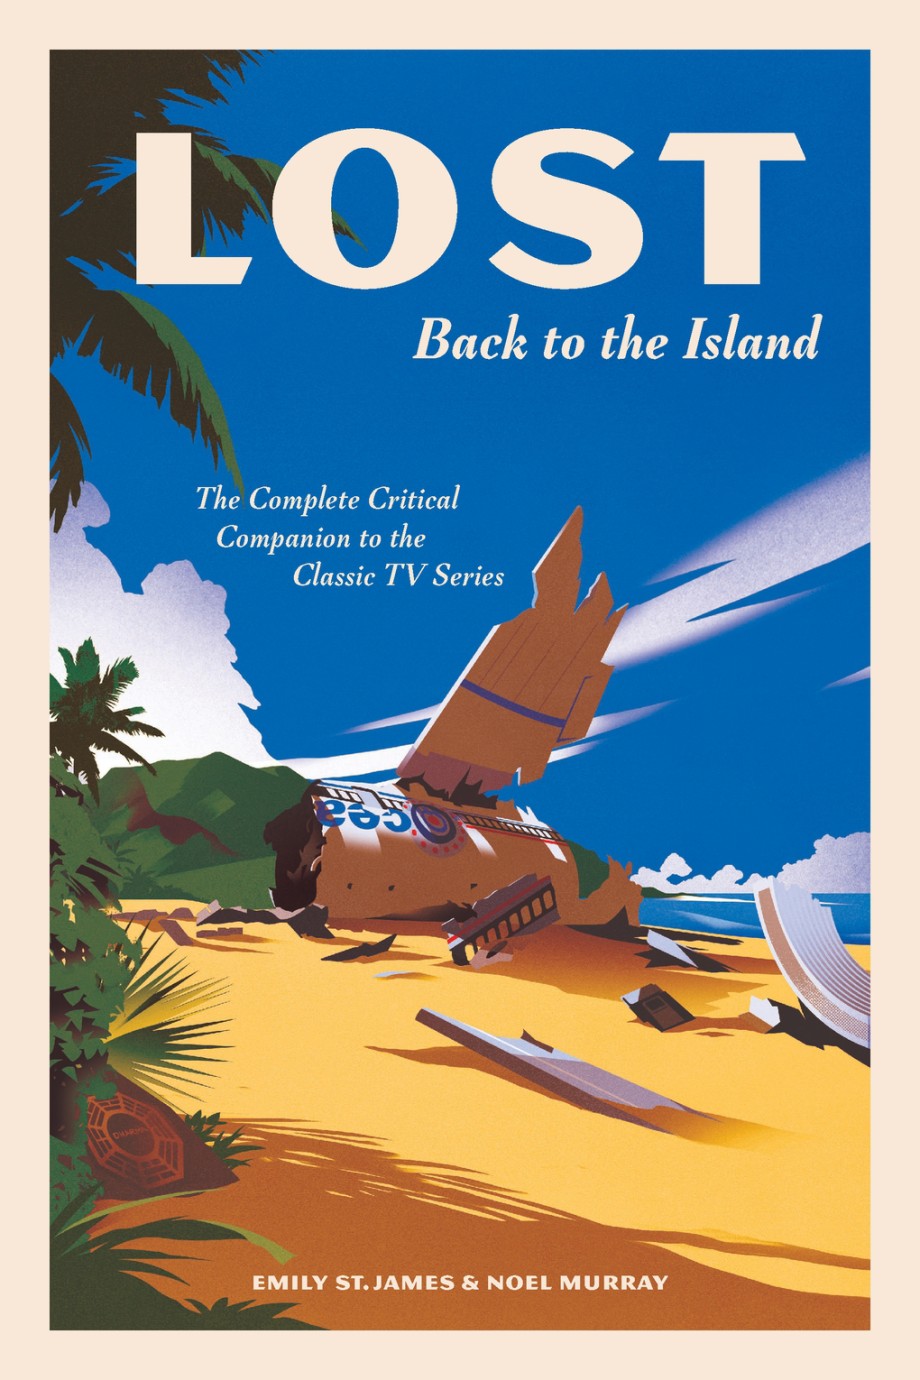 LOST: Back to the Island The Complete Critical Companion to The Classic TV Series